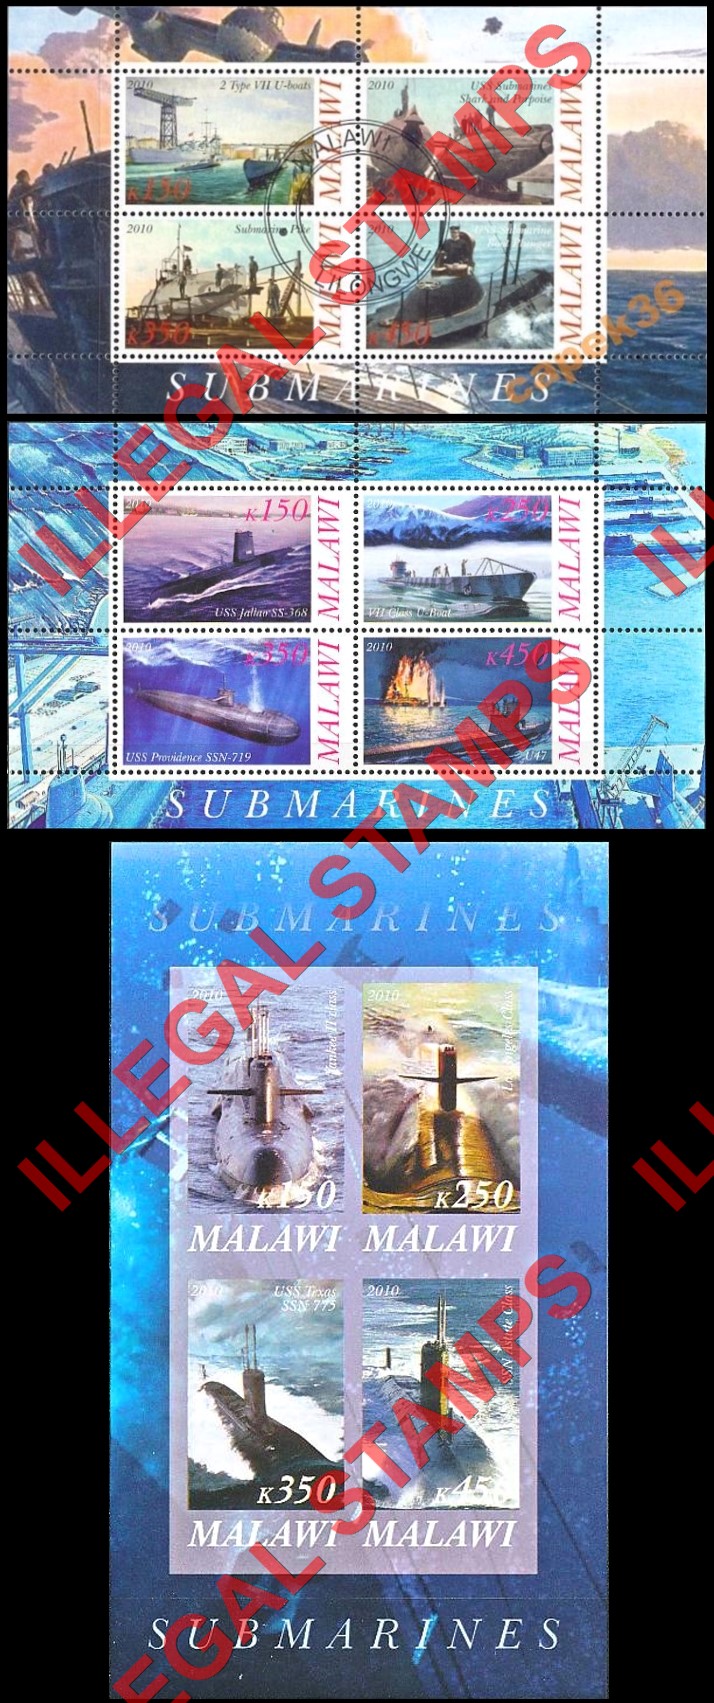 Malawi 2010 Submarines Illegal Stamp Souvenir Sheets of 4